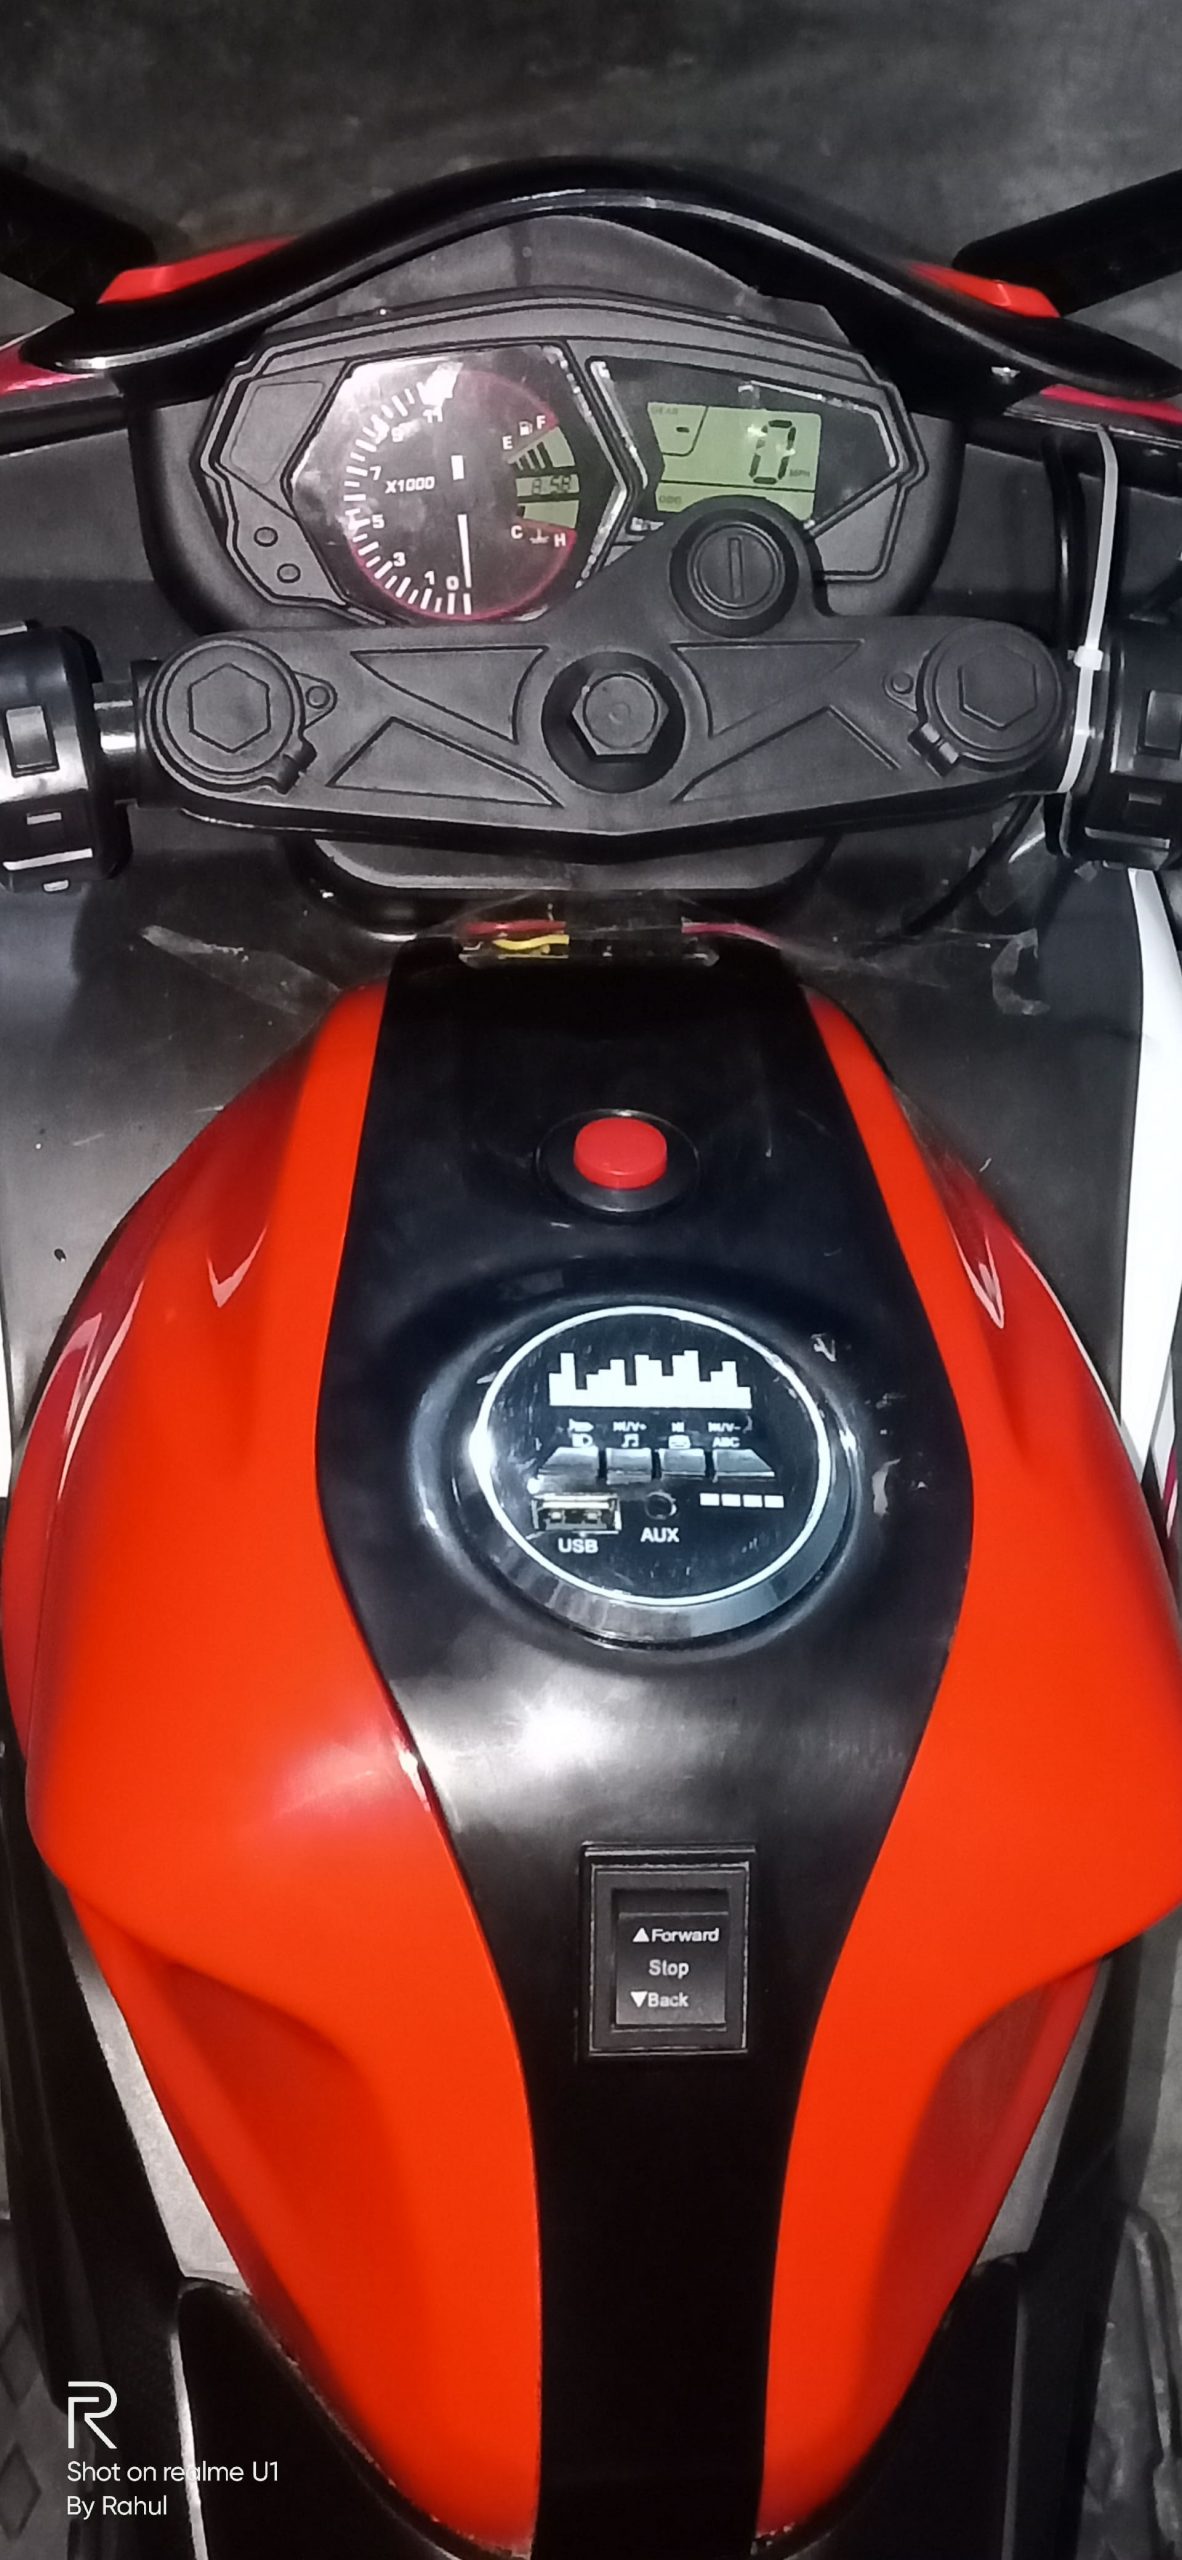 DASHBOARD OF BATTERY OPERATED BIKE FOR KIDS